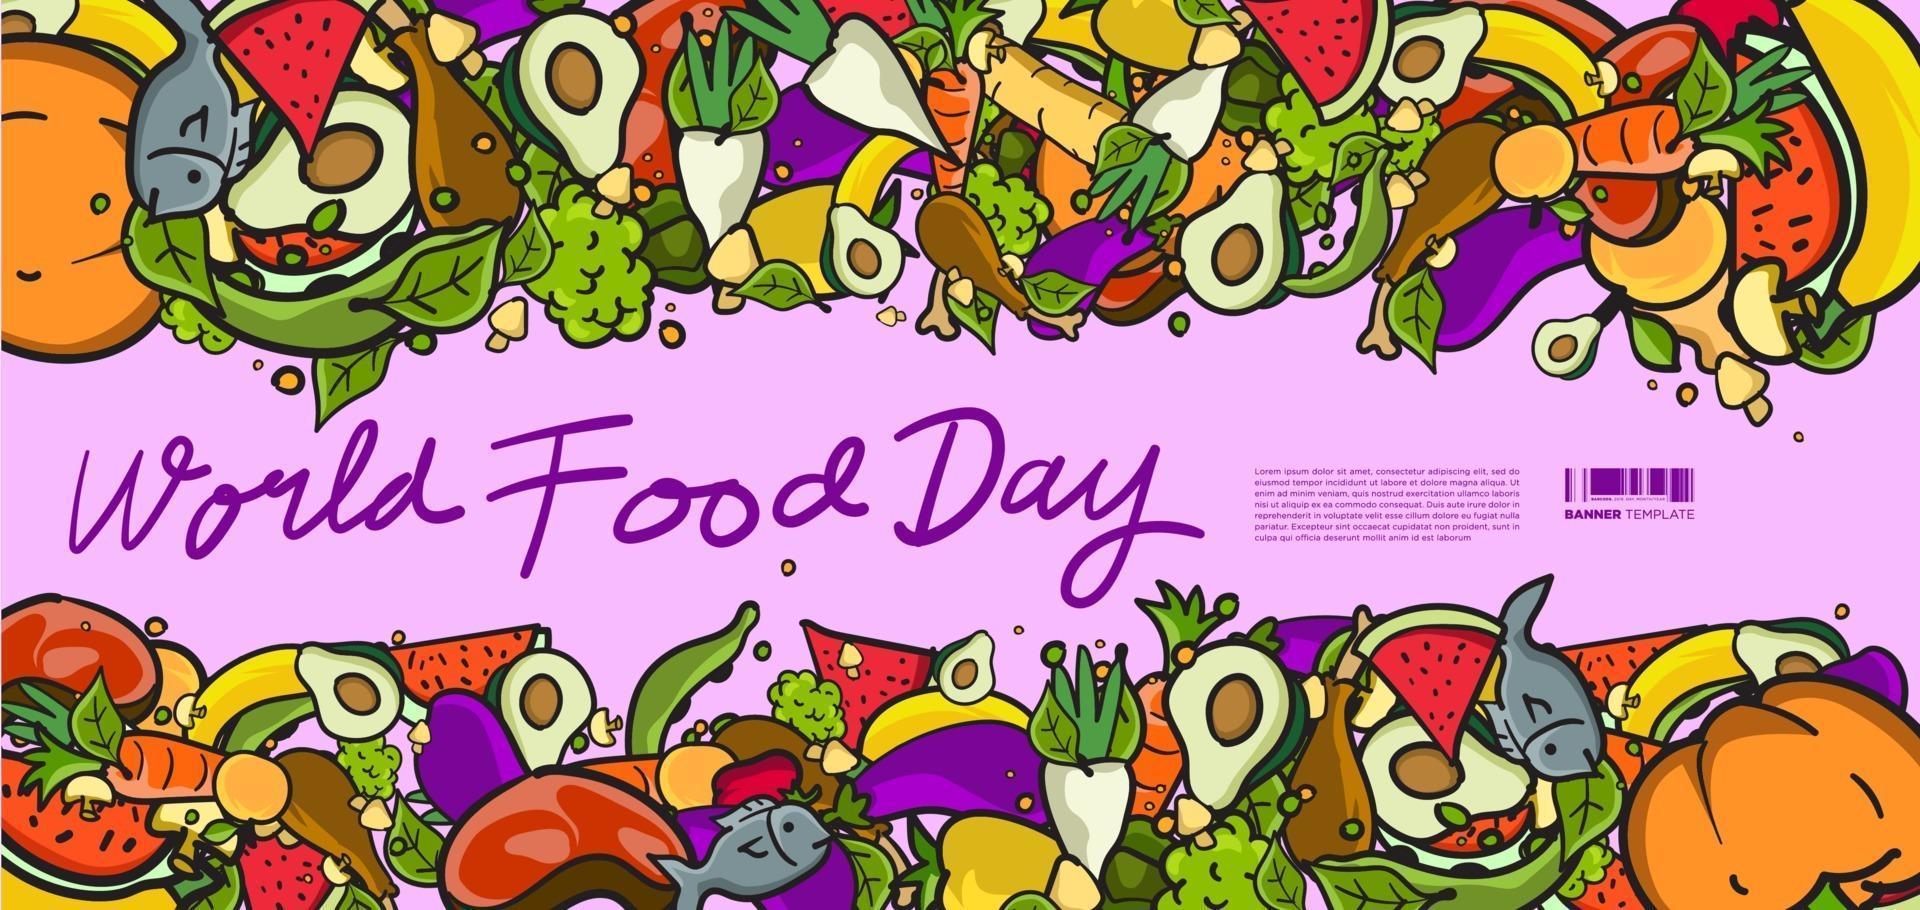 World food day banner with colorful illustration vector